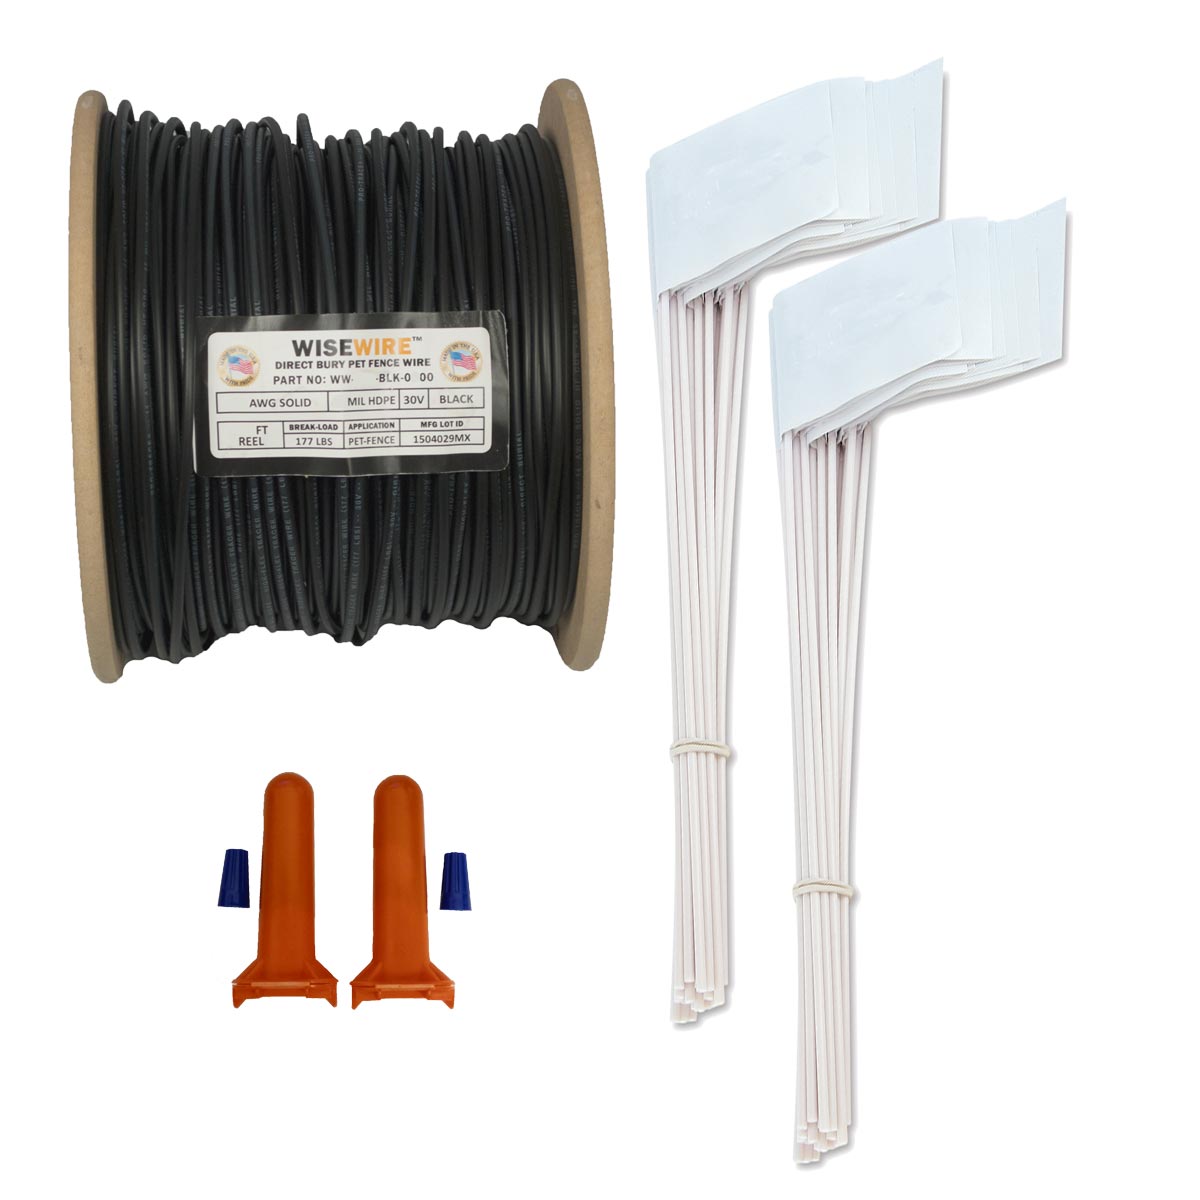 WiseWire? 18 gauge Boundary Wire Kit 1000ft